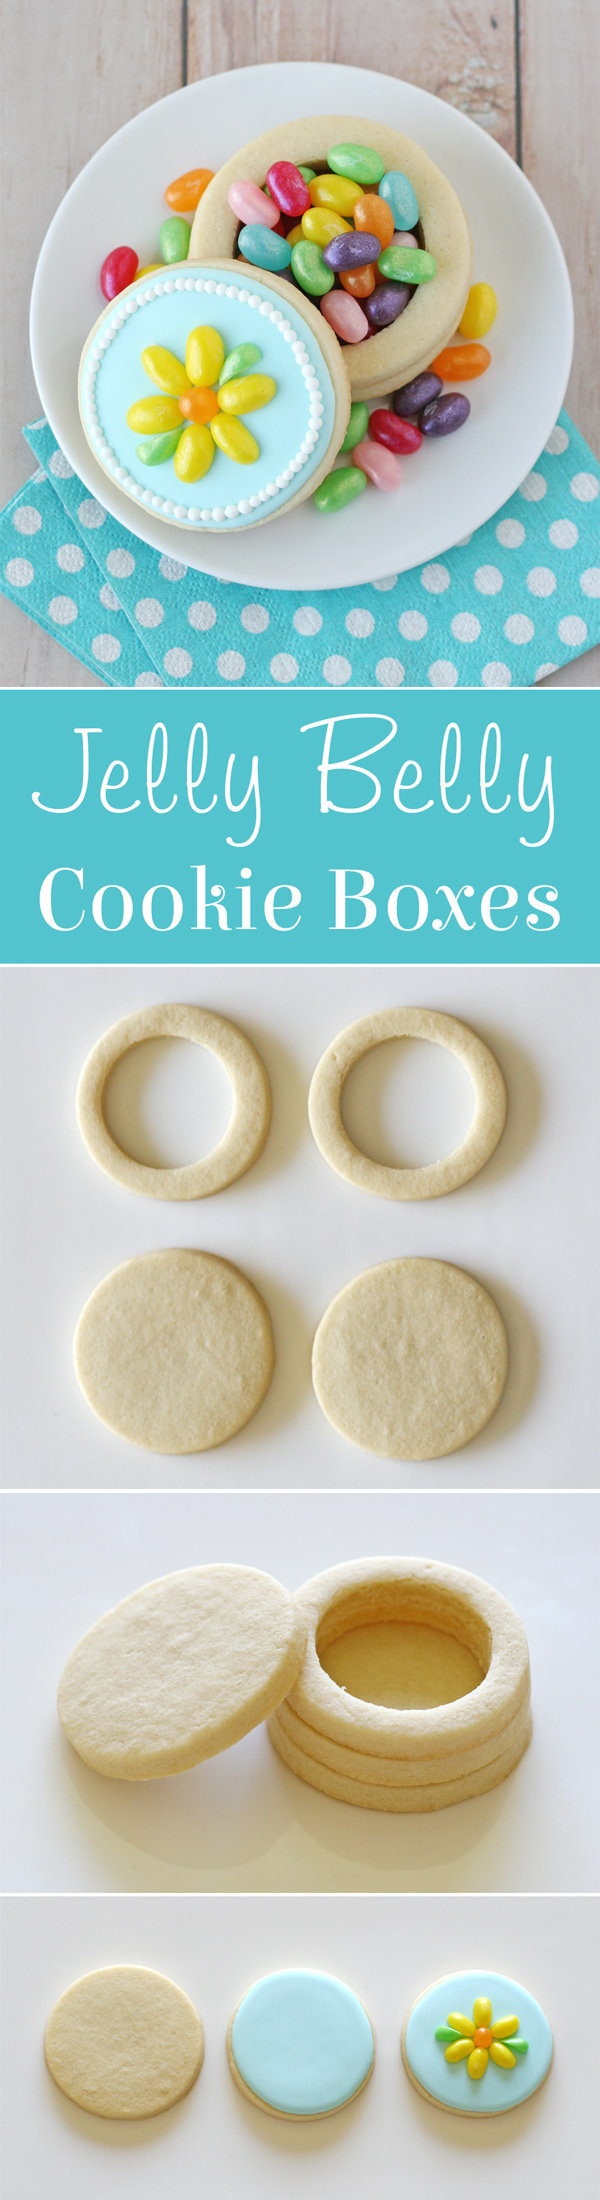 Step by step instructions make it easy to make these impressive cookie boxes!  